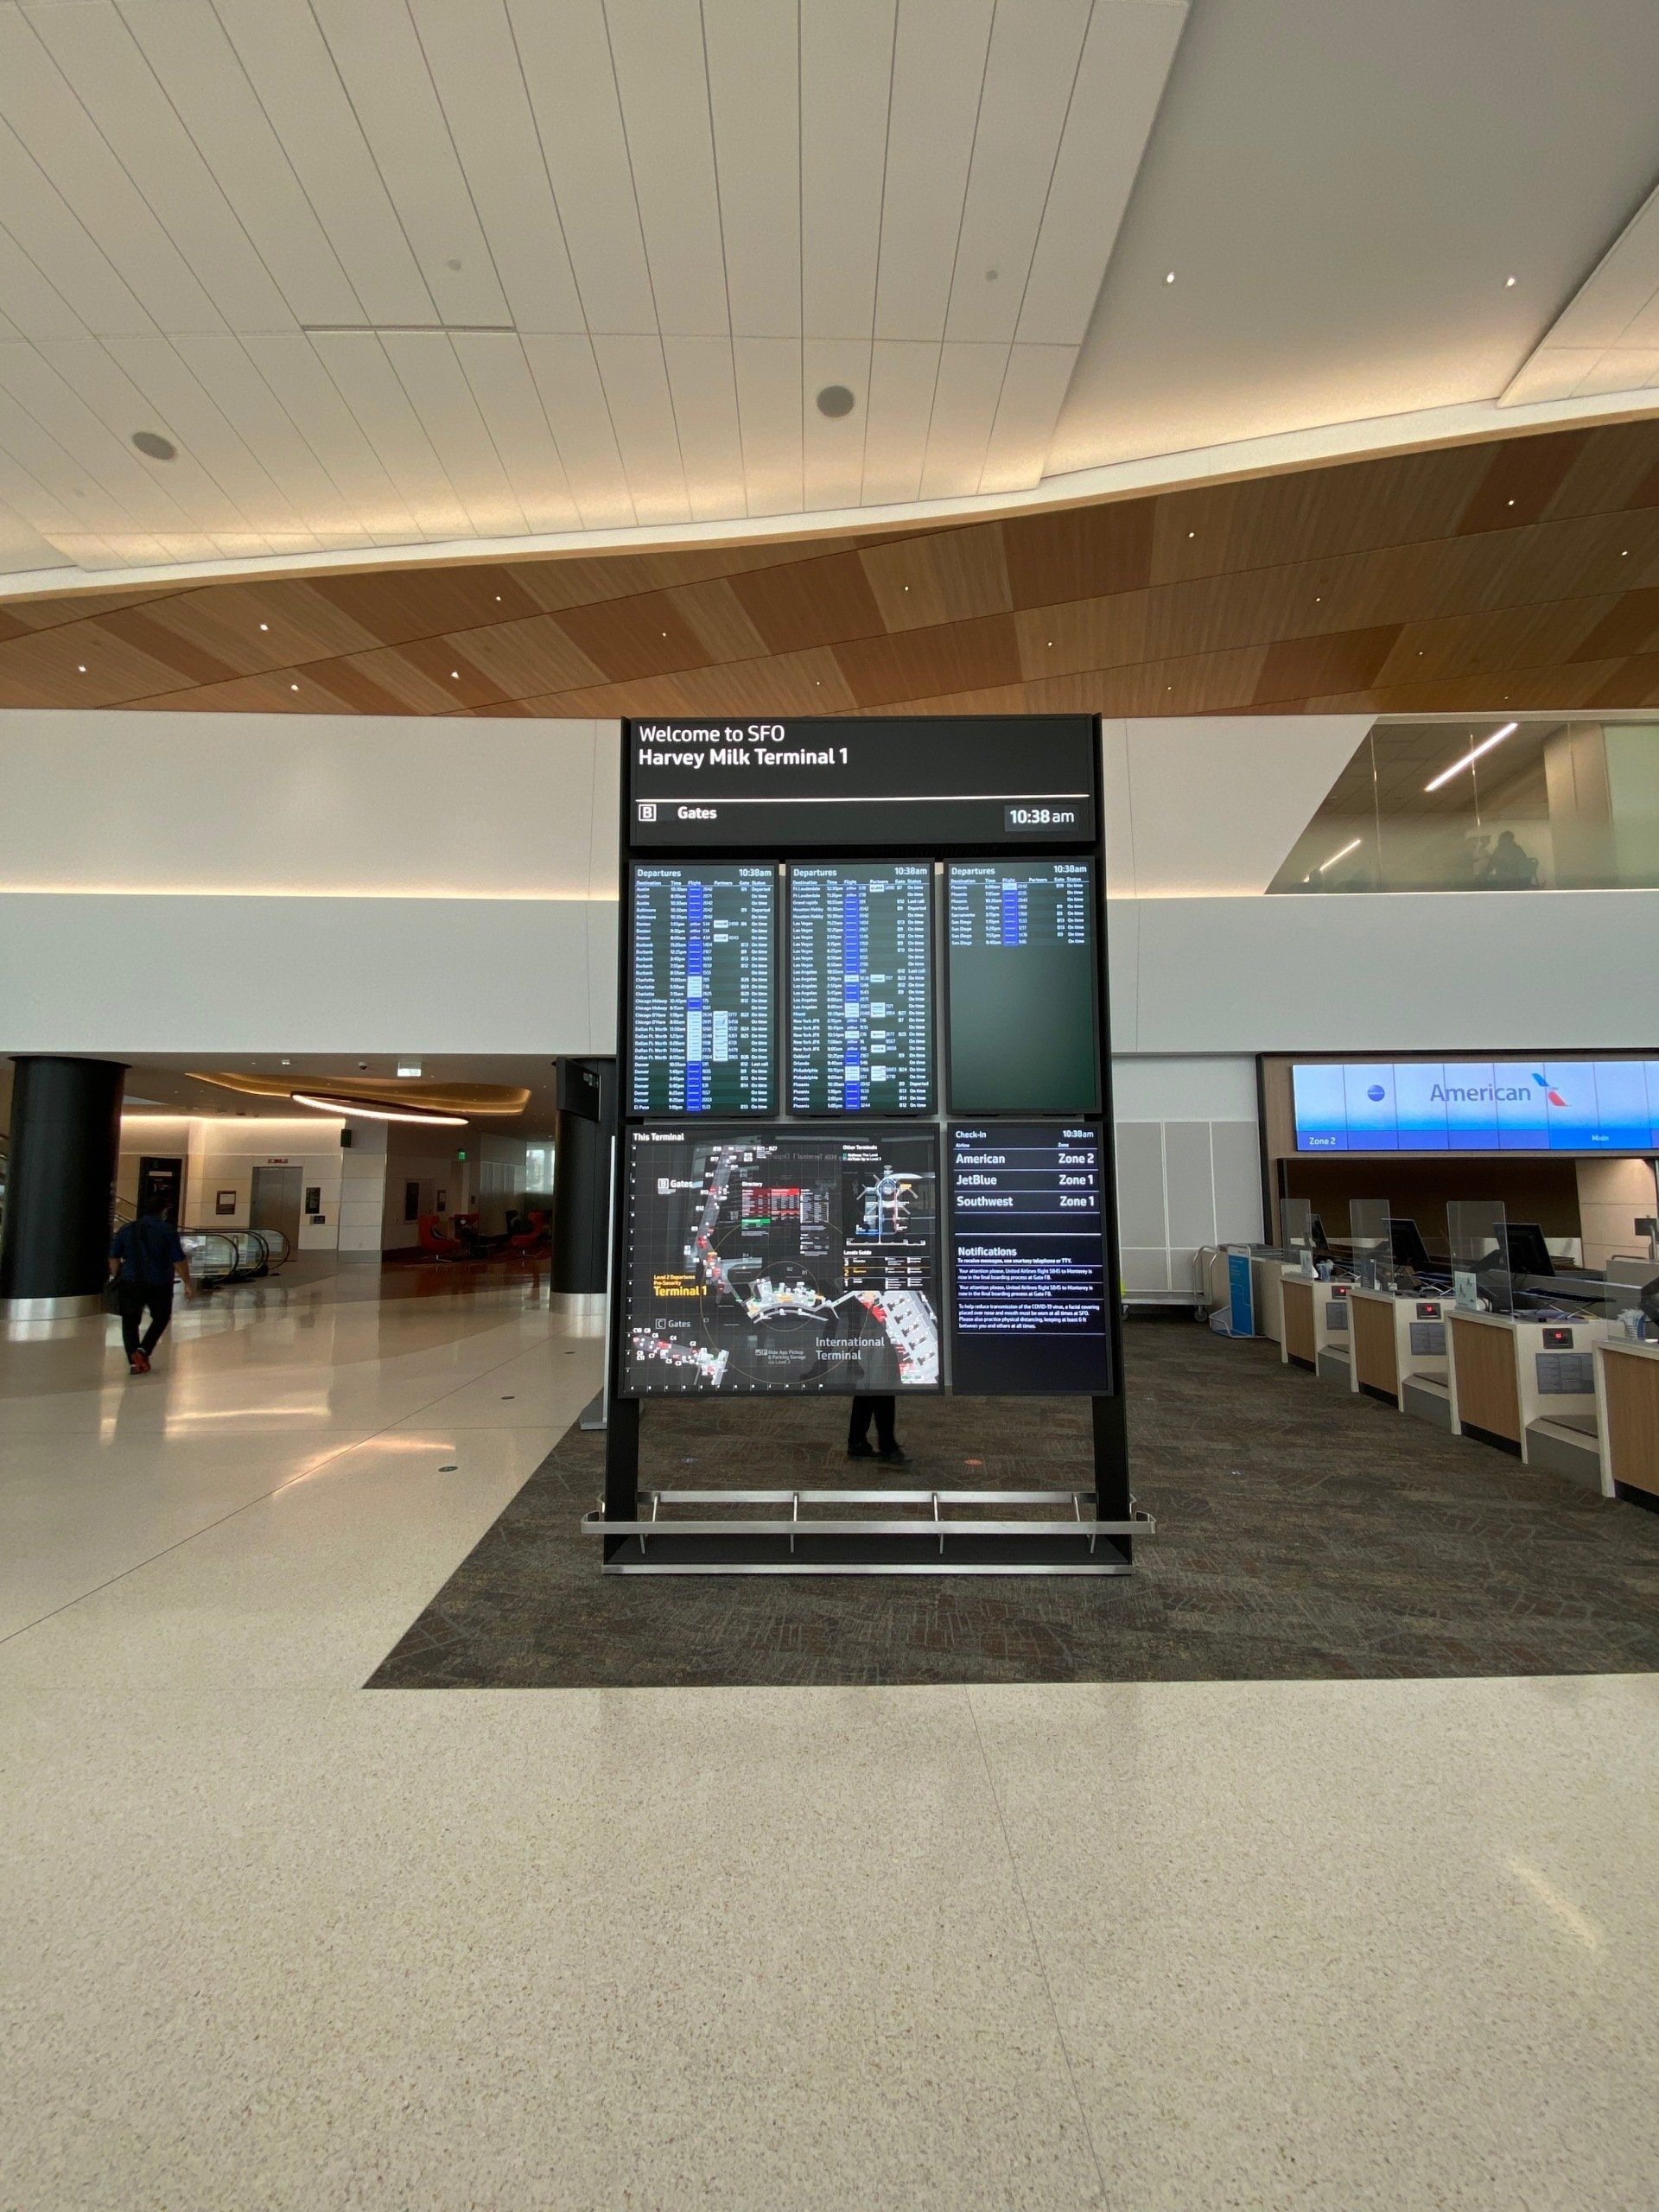 Photo of a departure and arrival board at the SF airport terminal.